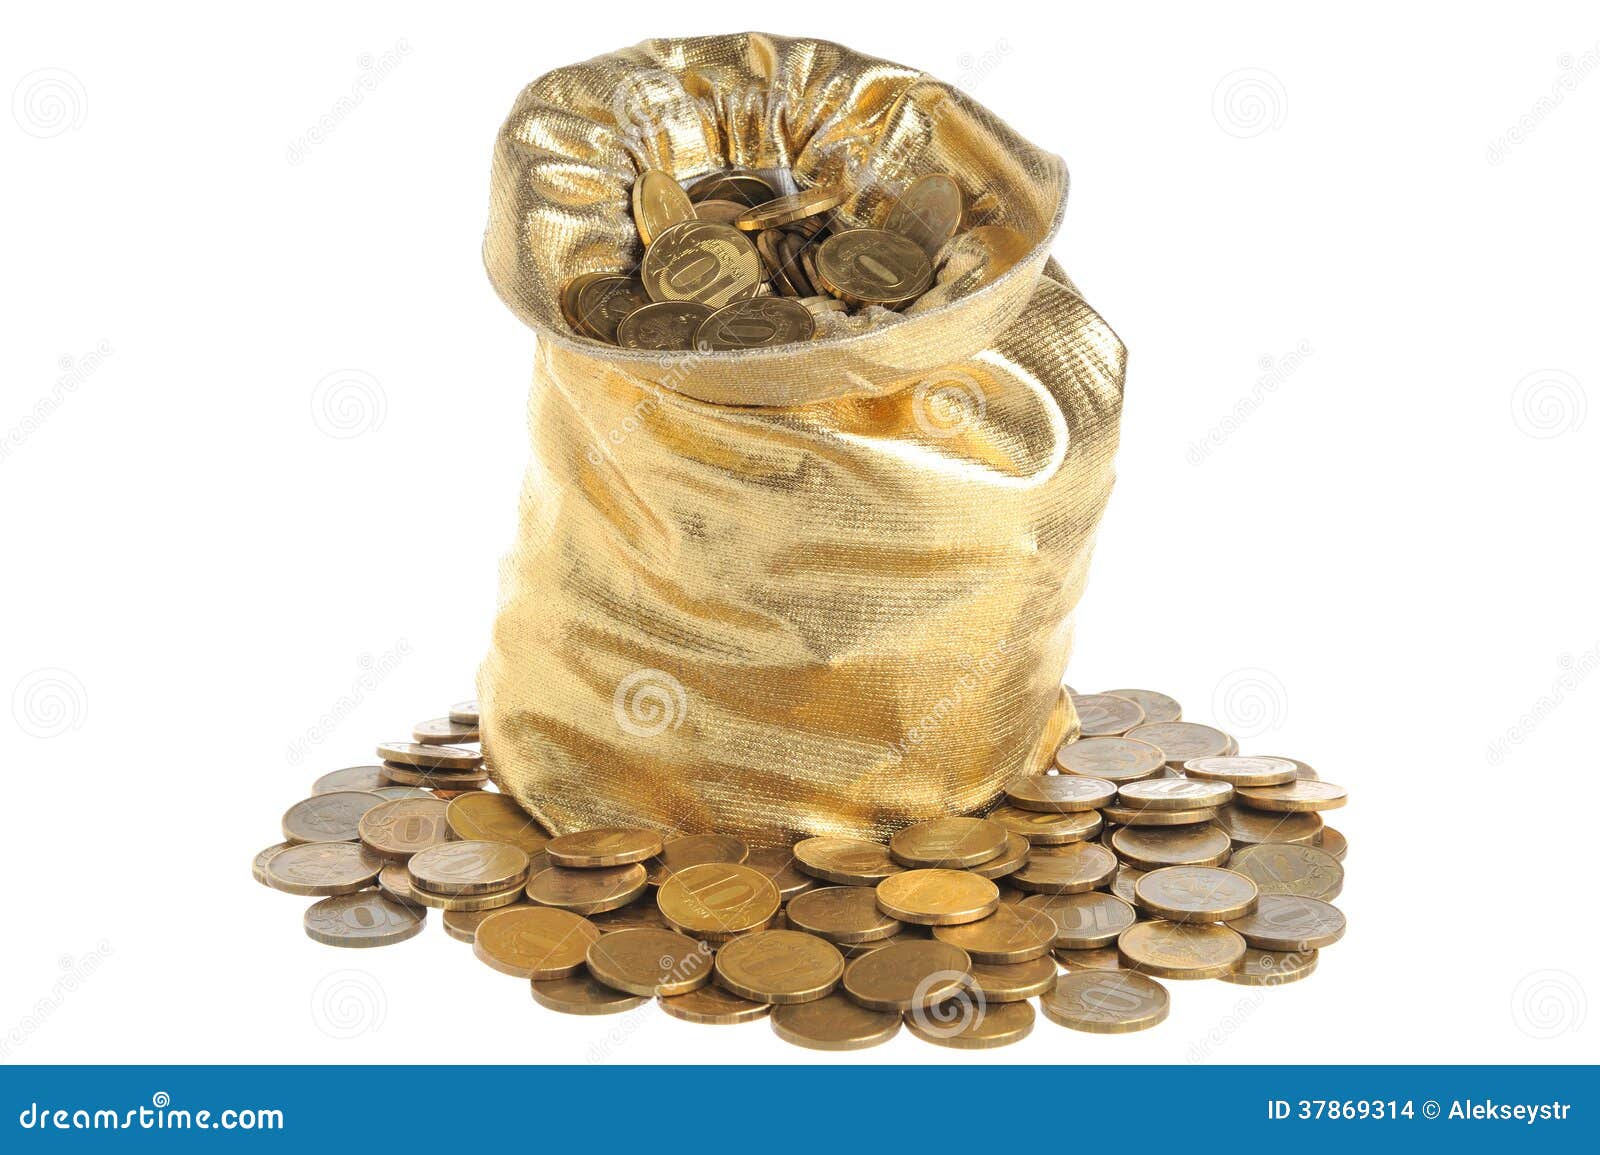 Gold Sack Full Of Coins Isolated On White Stock Photo - Image of monetary, objects: 37869314